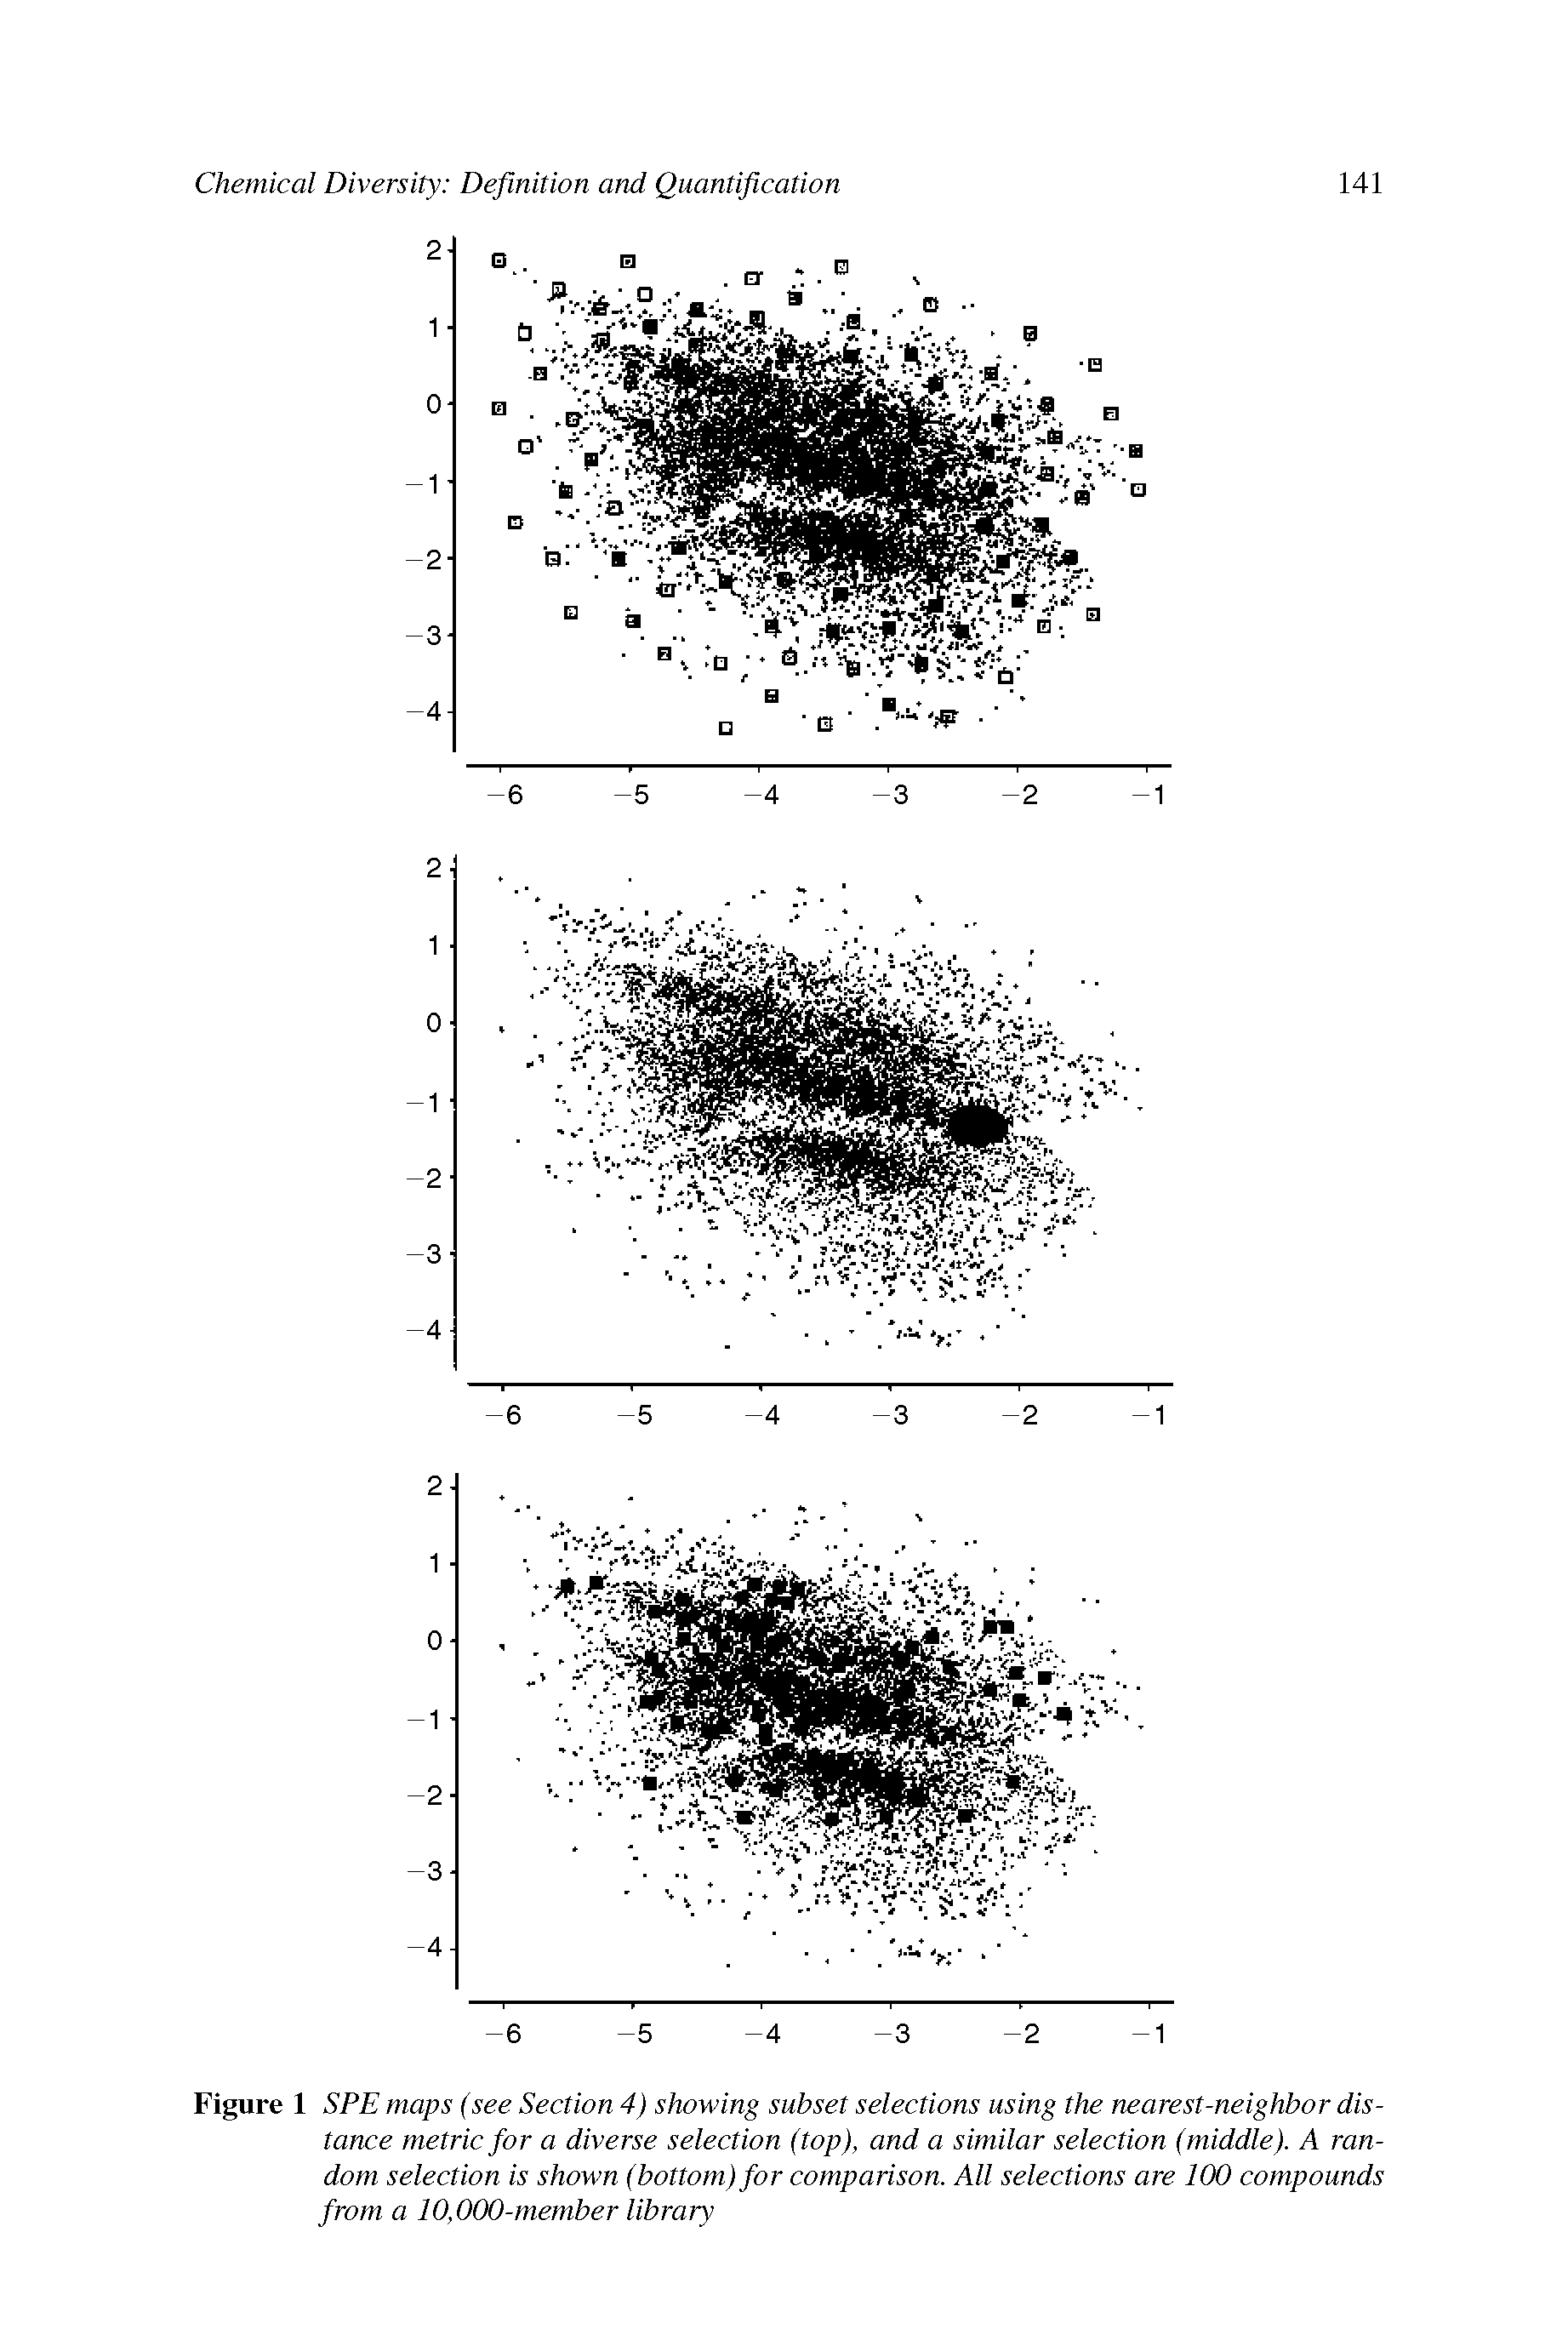 Figure 1 SPE maps (see Section 4) showing subset selections using the nearest-neighbor distance metric for a diverse selection (top), and a similar selection (middle). A random selection is shown (bottom) for comparison. AH selections are 100 compounds from a 10,000-member library...